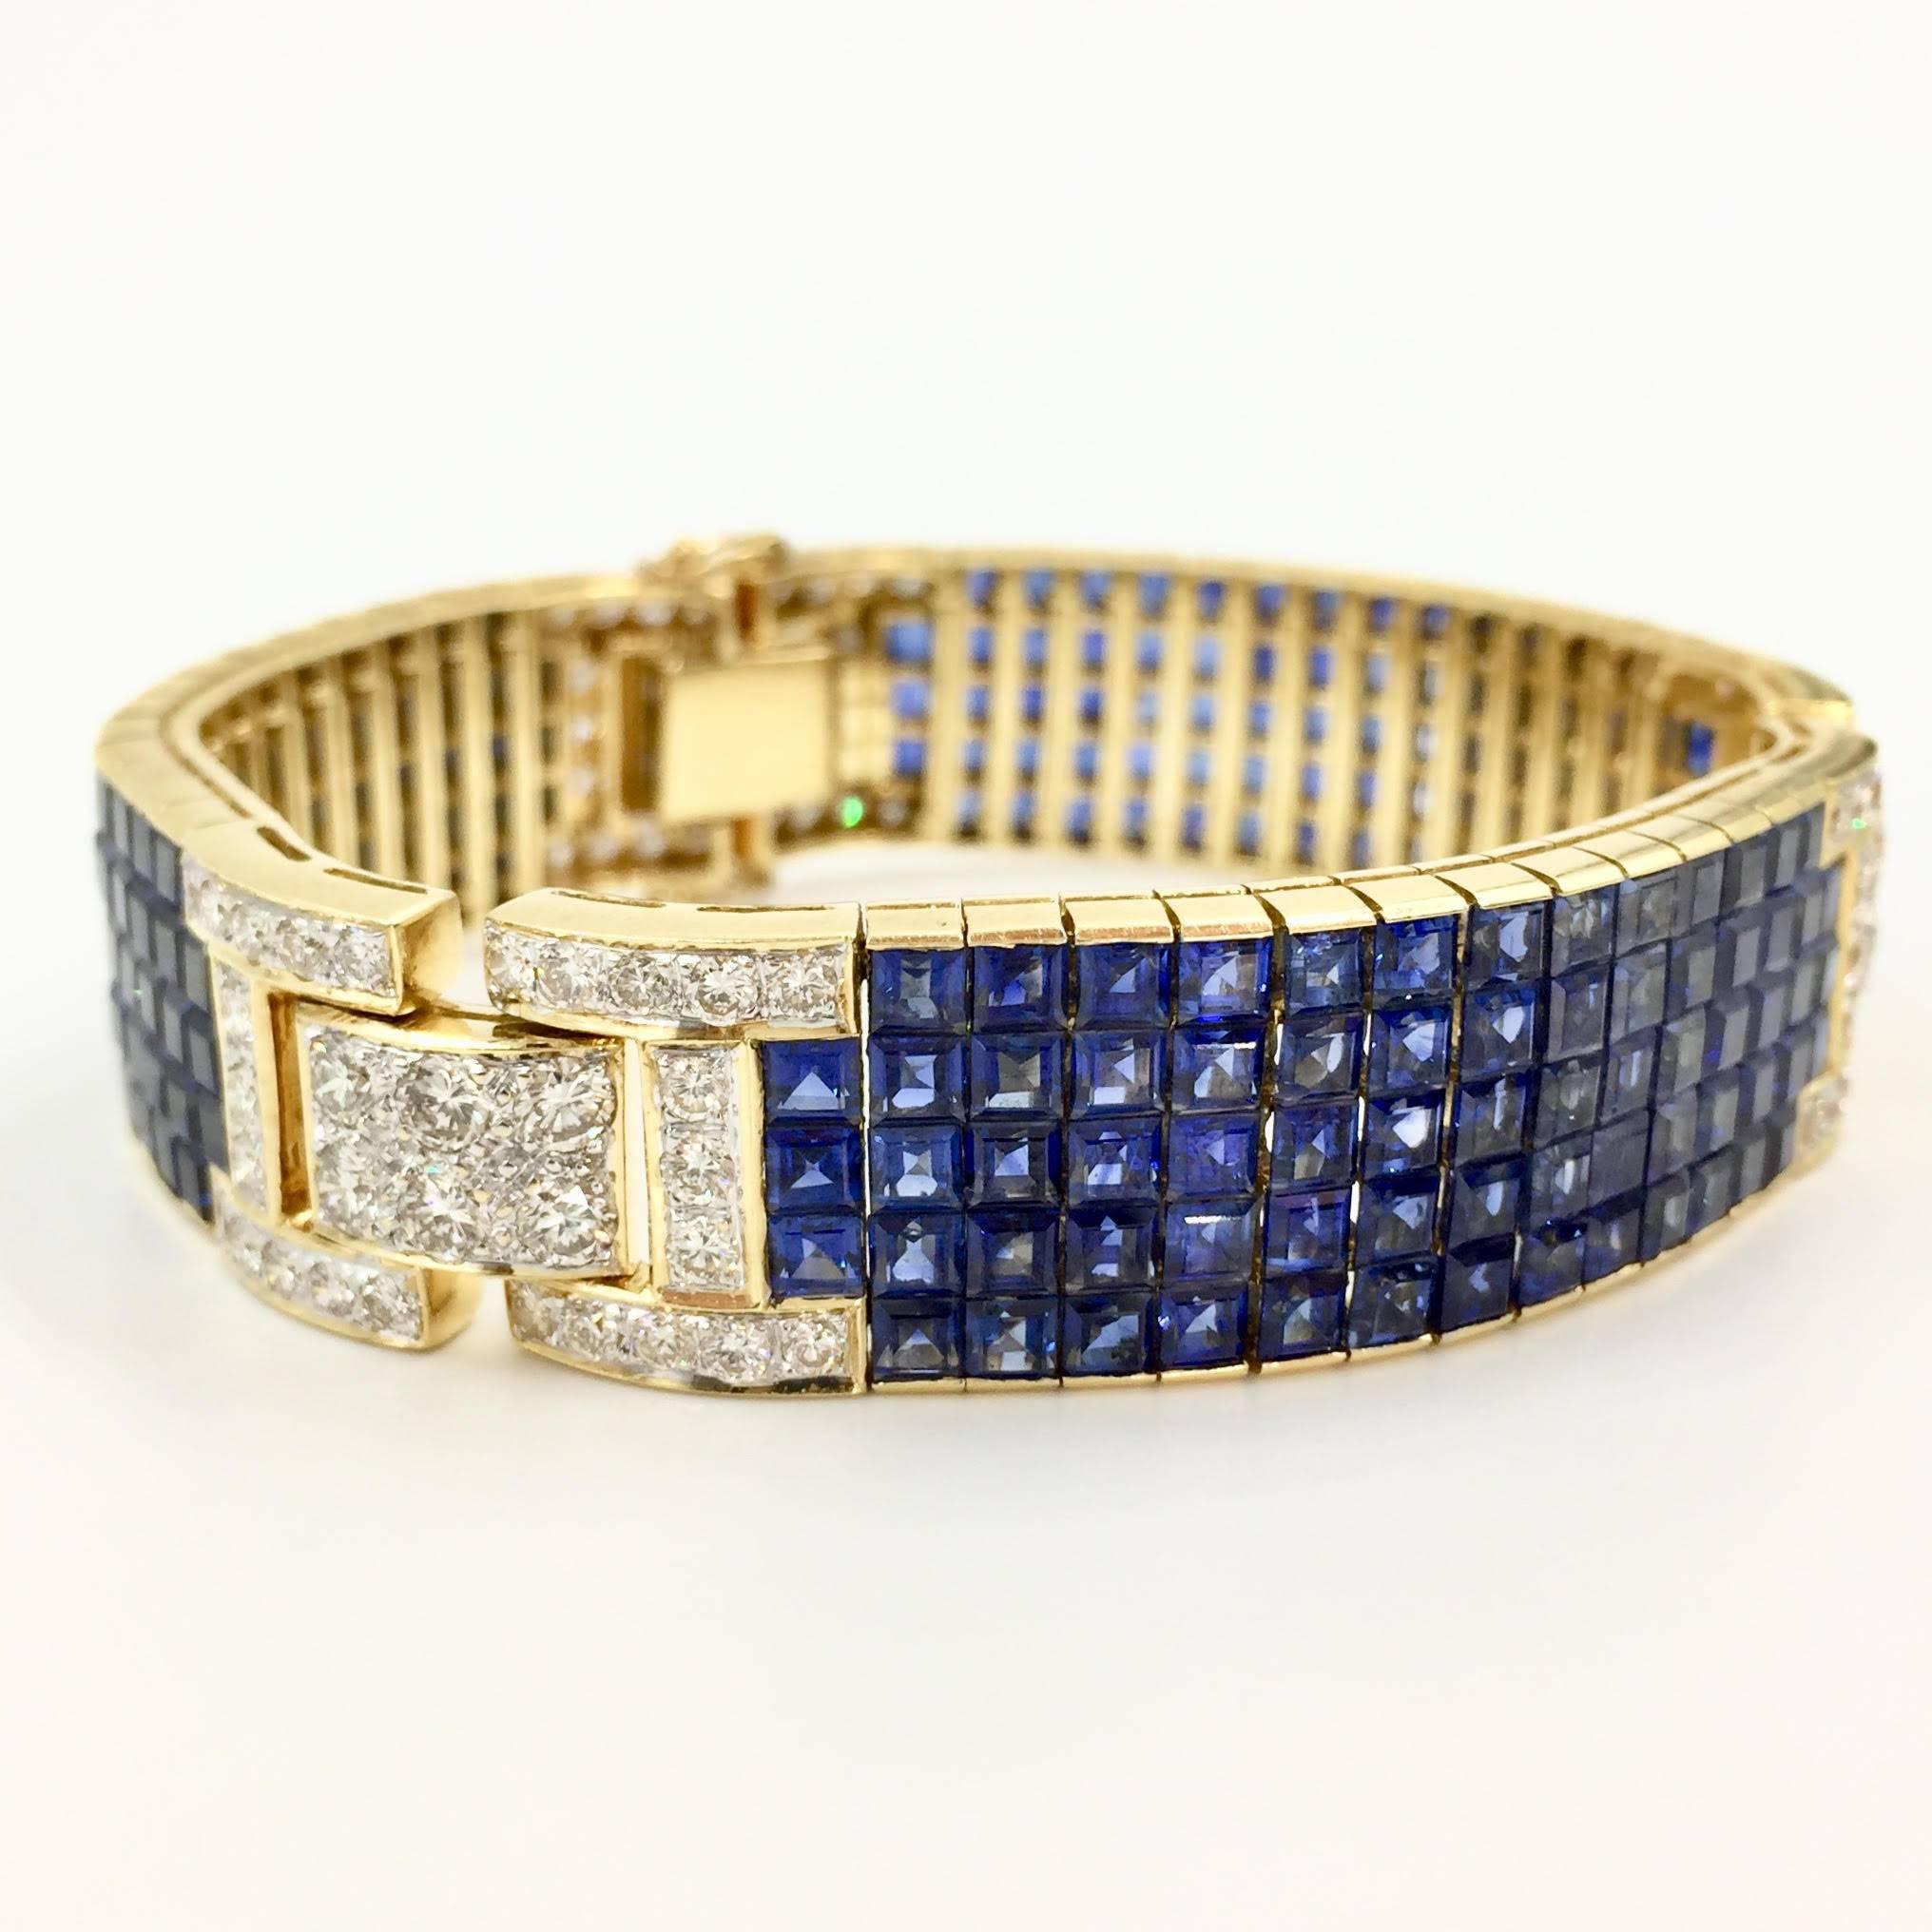 Sapphire and Diamond Wide Bracelet 18K Yellow Gold Approx. 35 Carats Sapphire TW For Sale 1